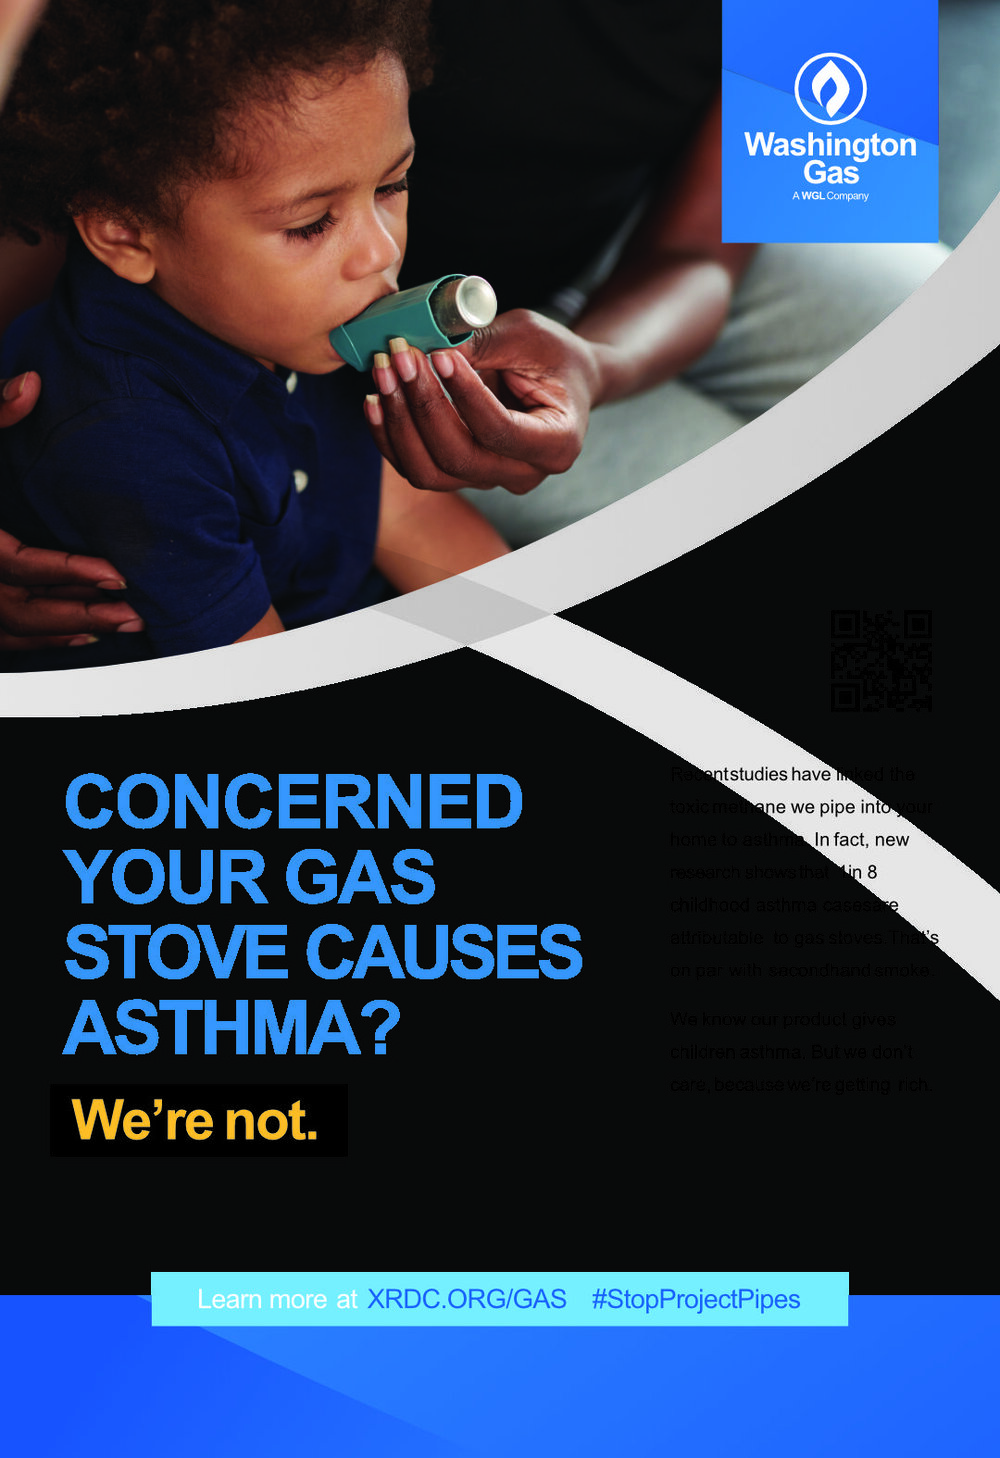 "Concerned your gas stove causes asthma?"